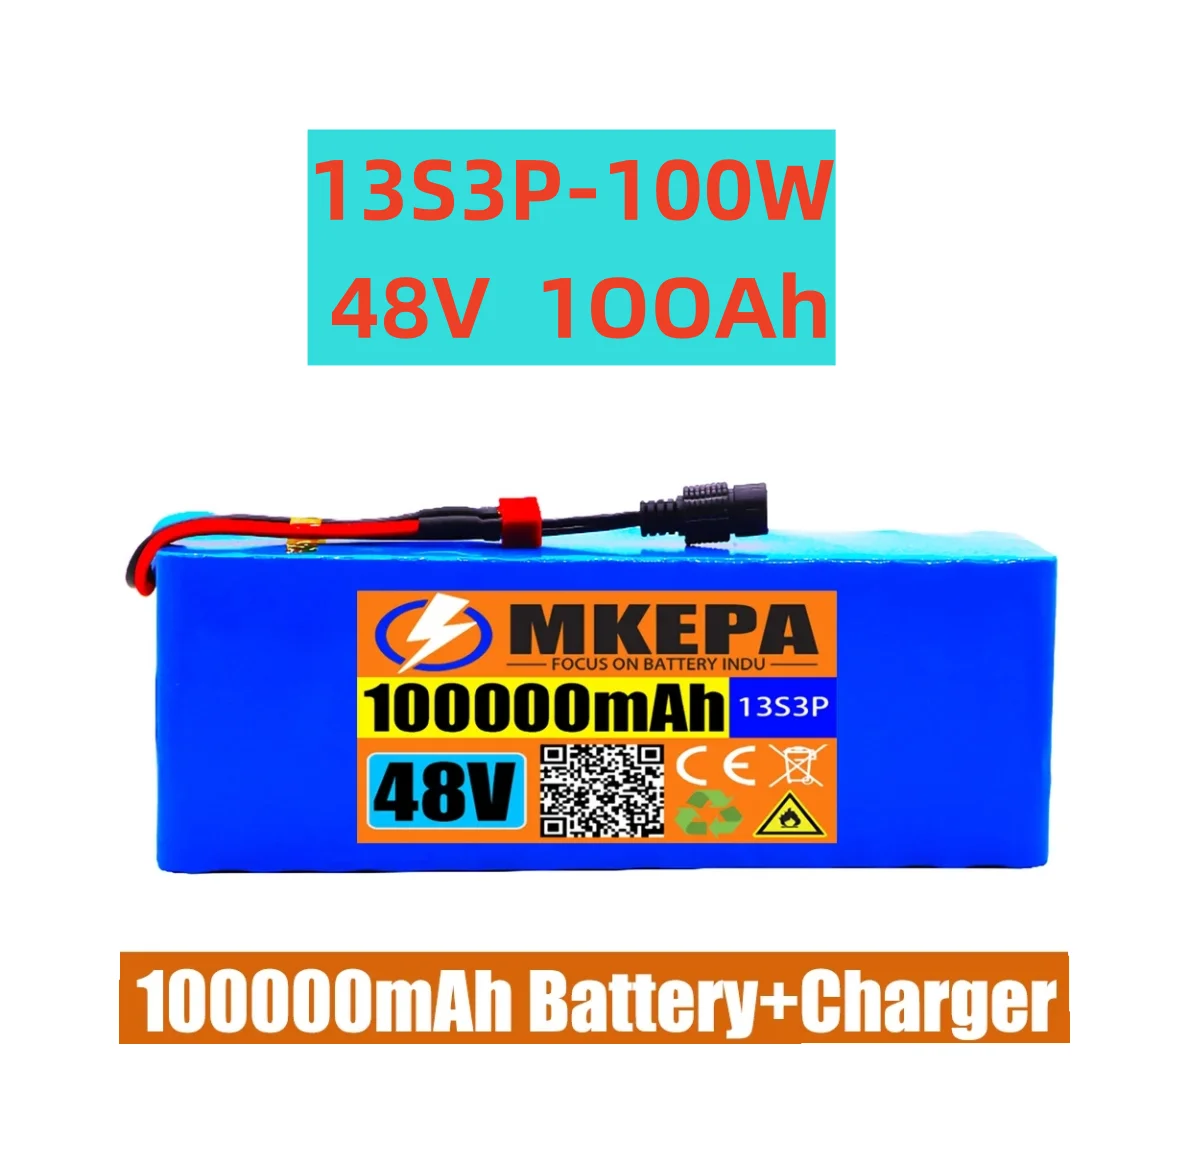 

13S3P 48V 100000mAh 100Ah lithium-ion battery pack with 1000W BMS, suitable for 54.6V electric bicycles and scooters